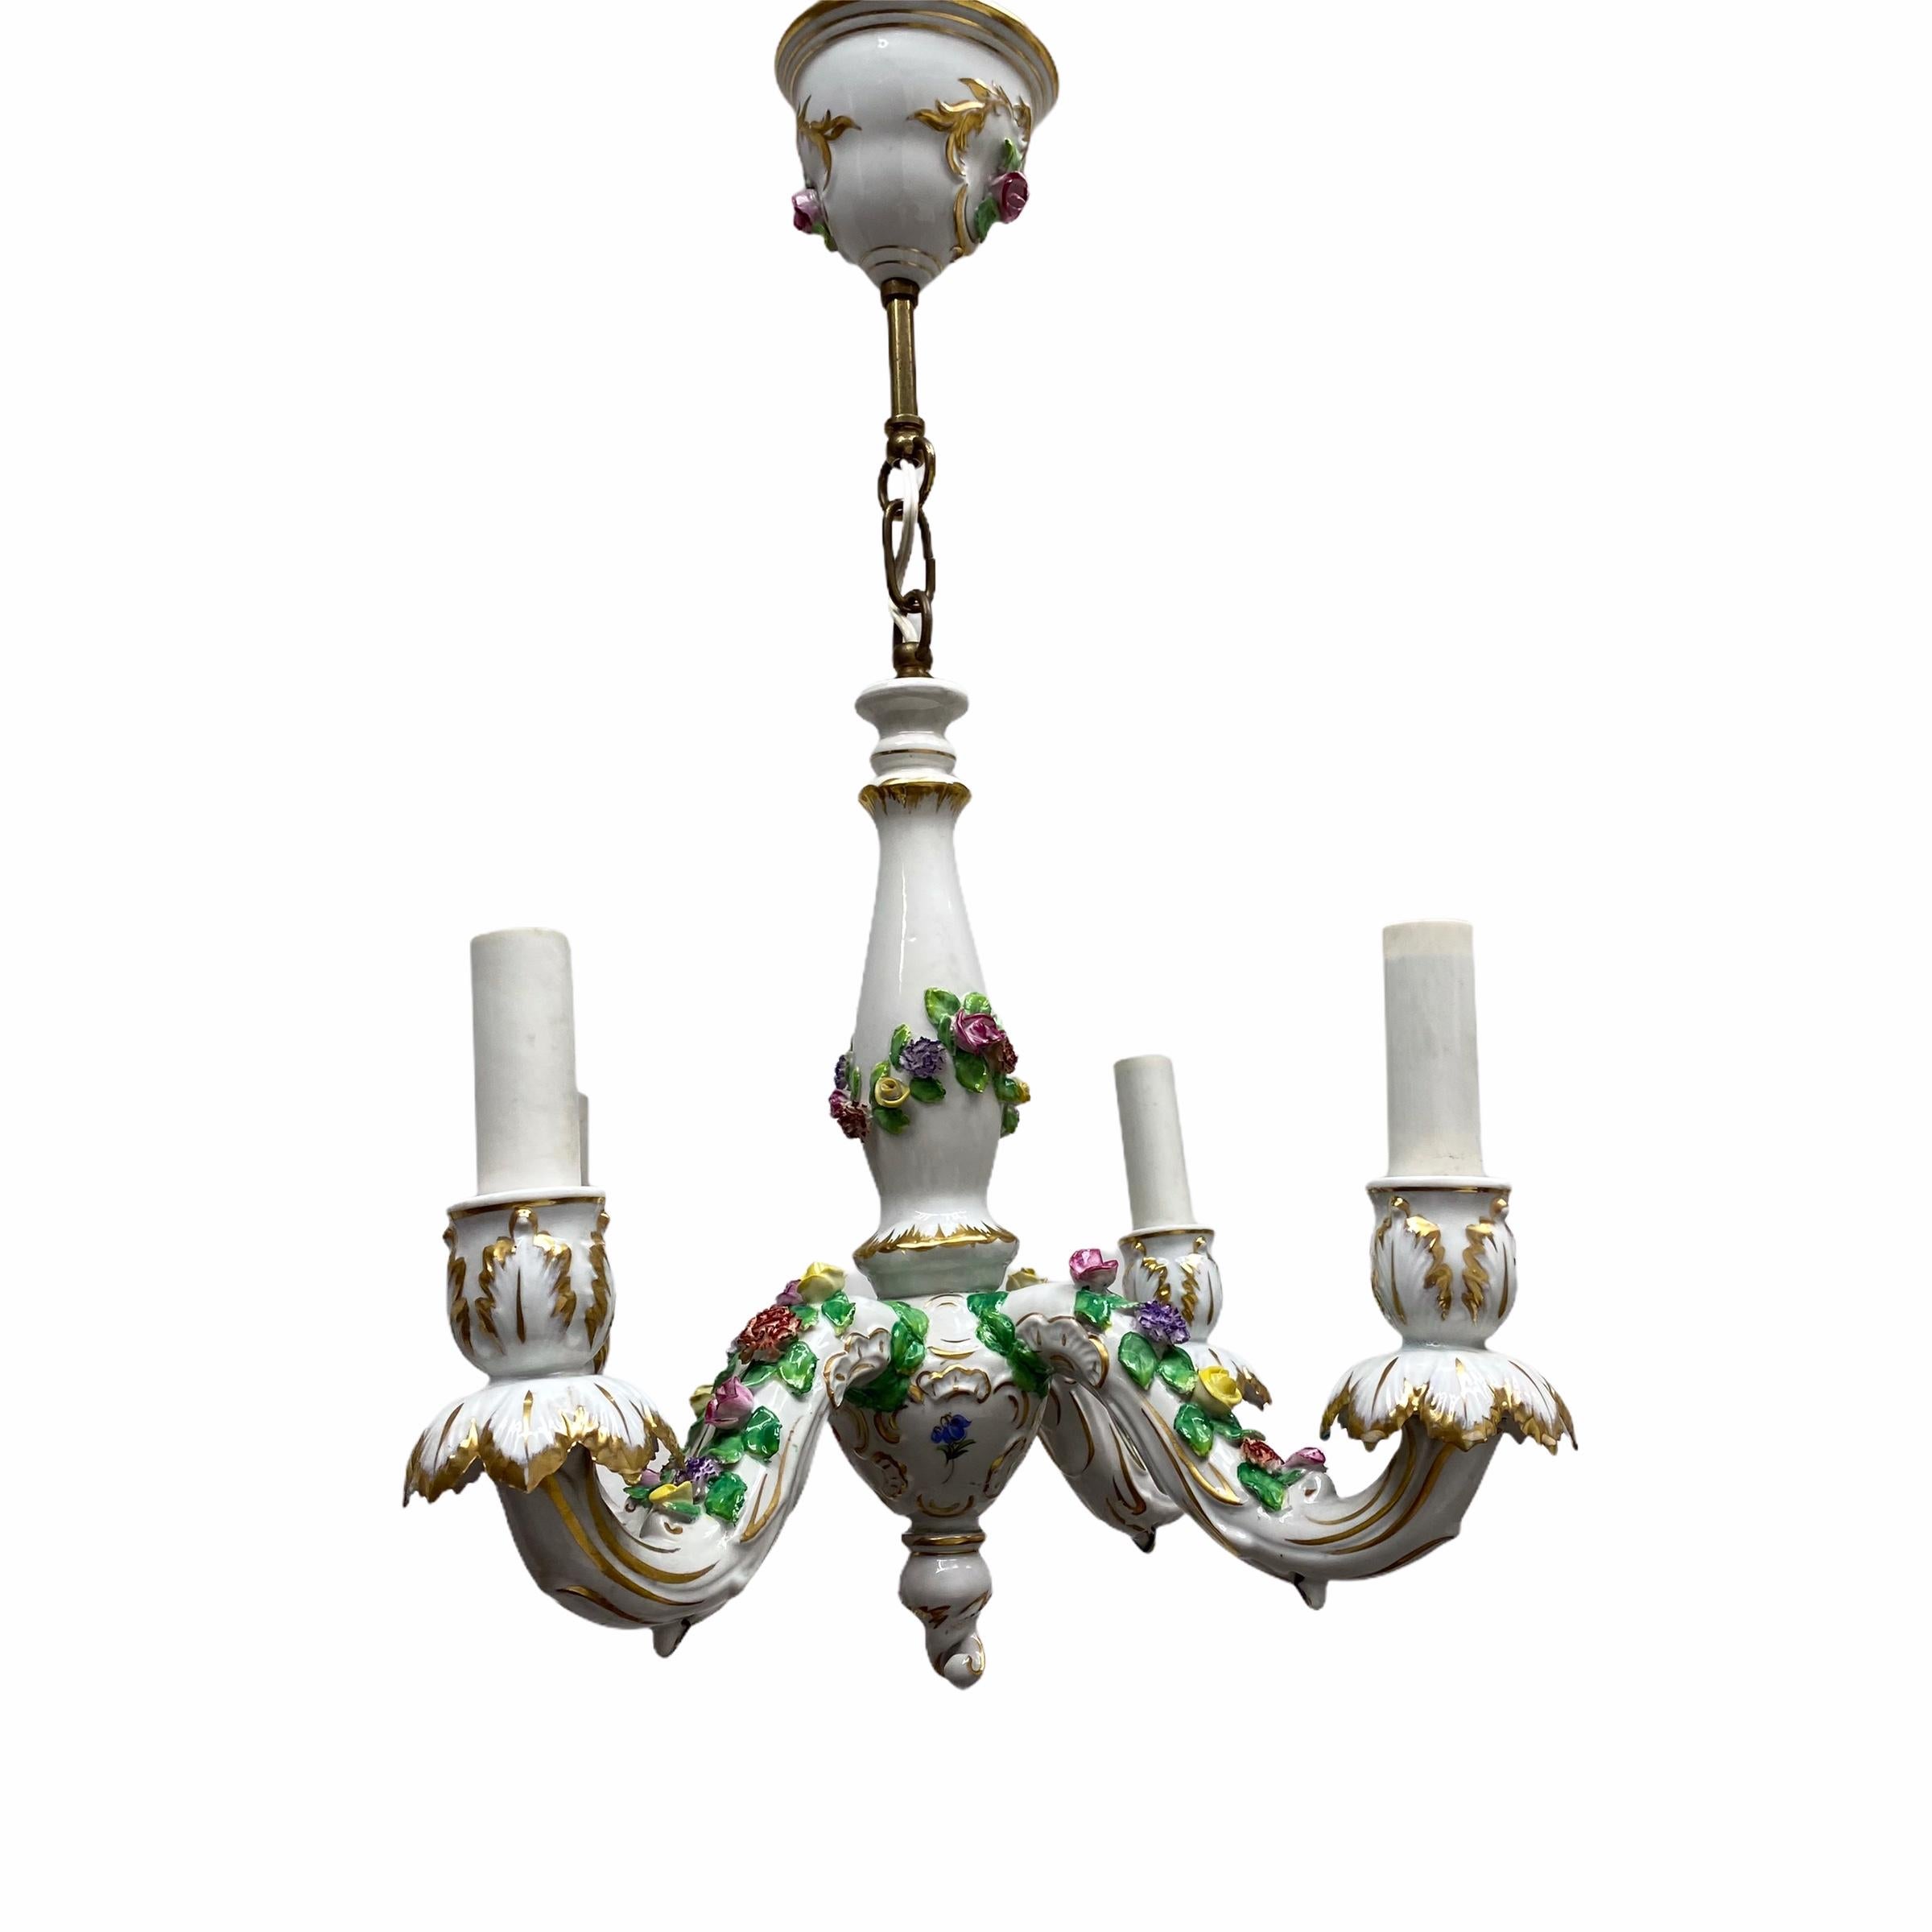 Add a touch of opulence to your home with this charming chandelier! It’s a petite Dresden Porcelain chandelier, to enhance any chic or eclectic home. We'd love to see it hanging in an entryway as a charming welcome home. The fixture requires four